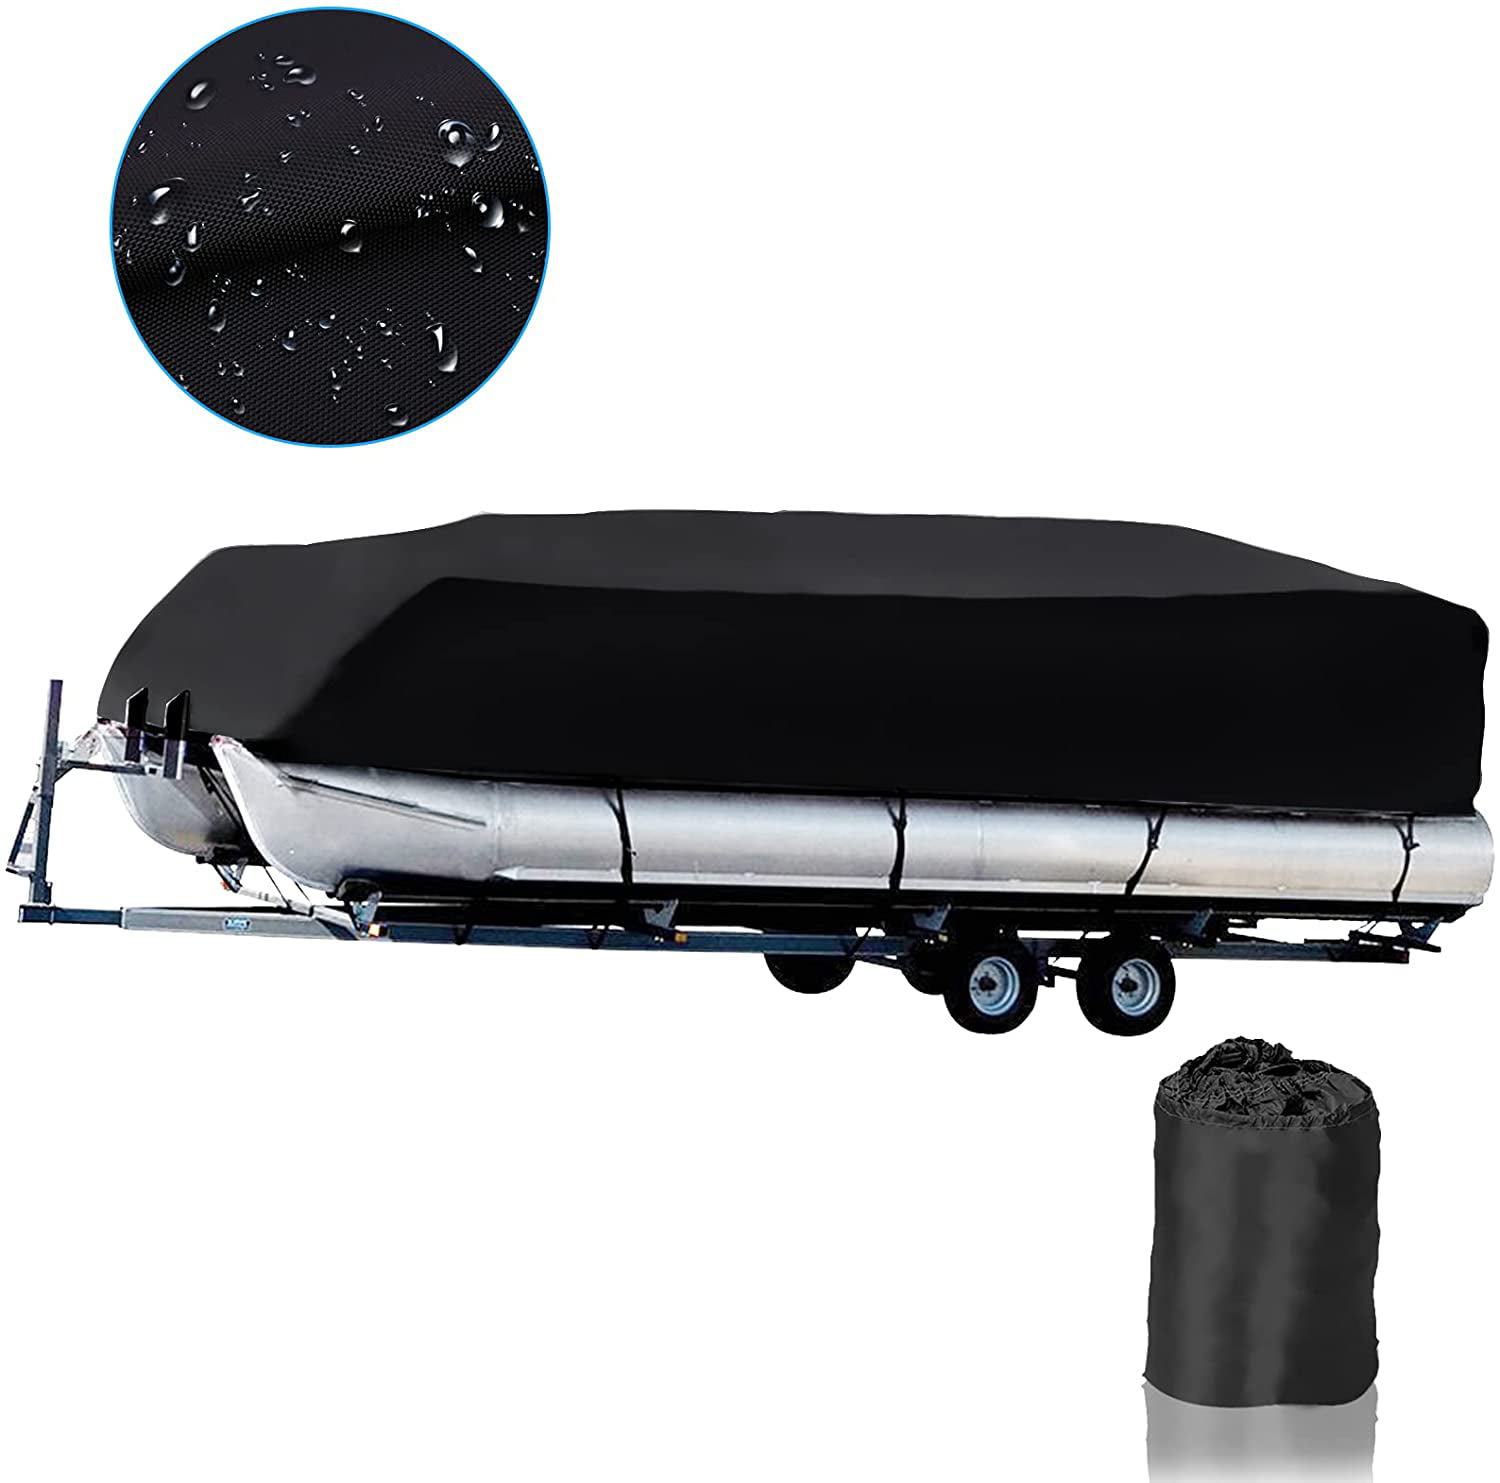 Black Trailerable Pontoon Boat Cover Waterproof Polyester Fabric Fits 17 to 20ft Long & Beam Width up to 102in Pontoon Boat 